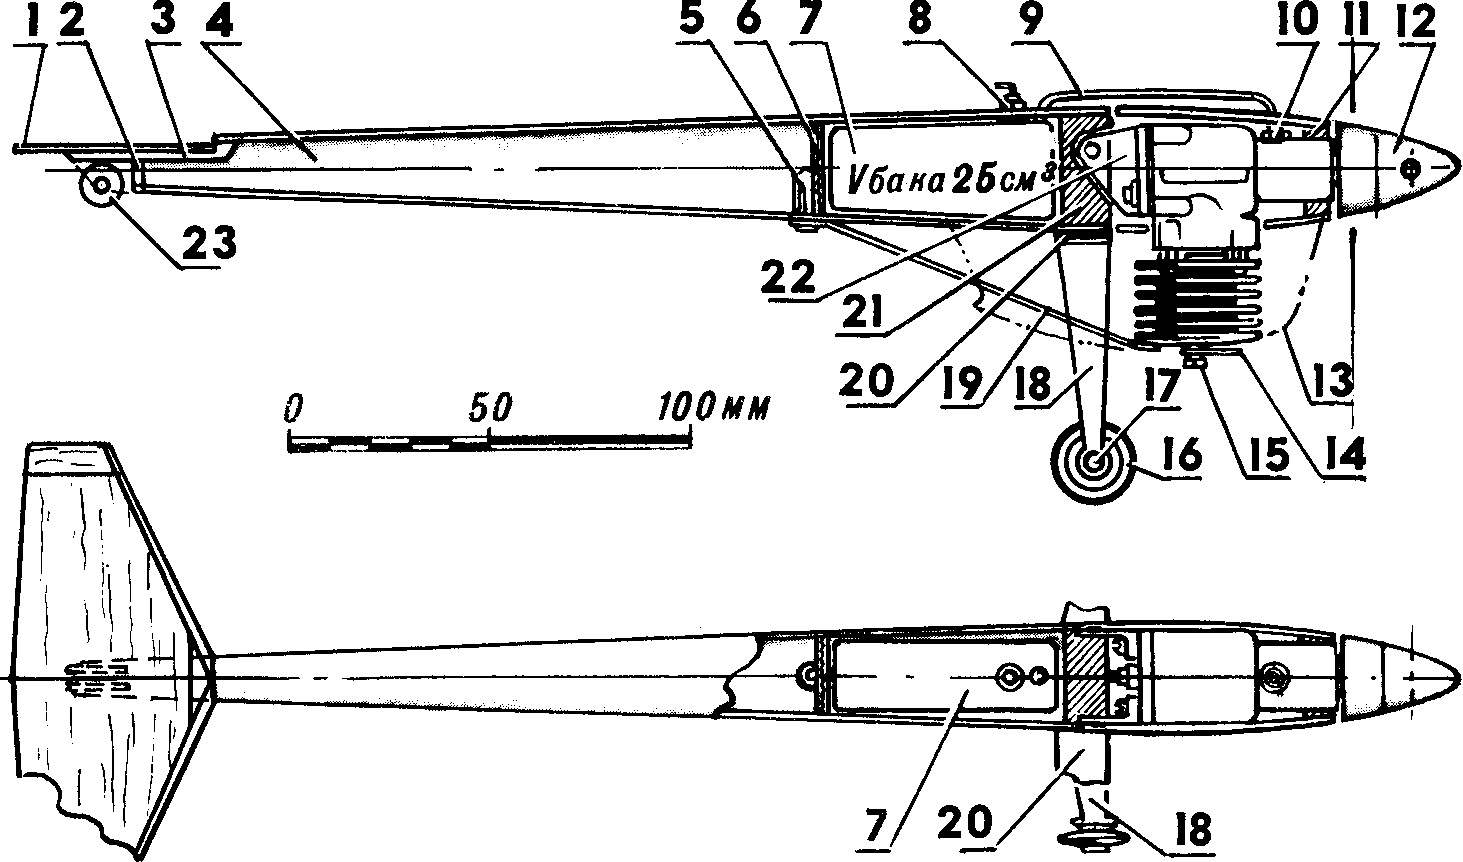 Fig. 2. The design of the model.